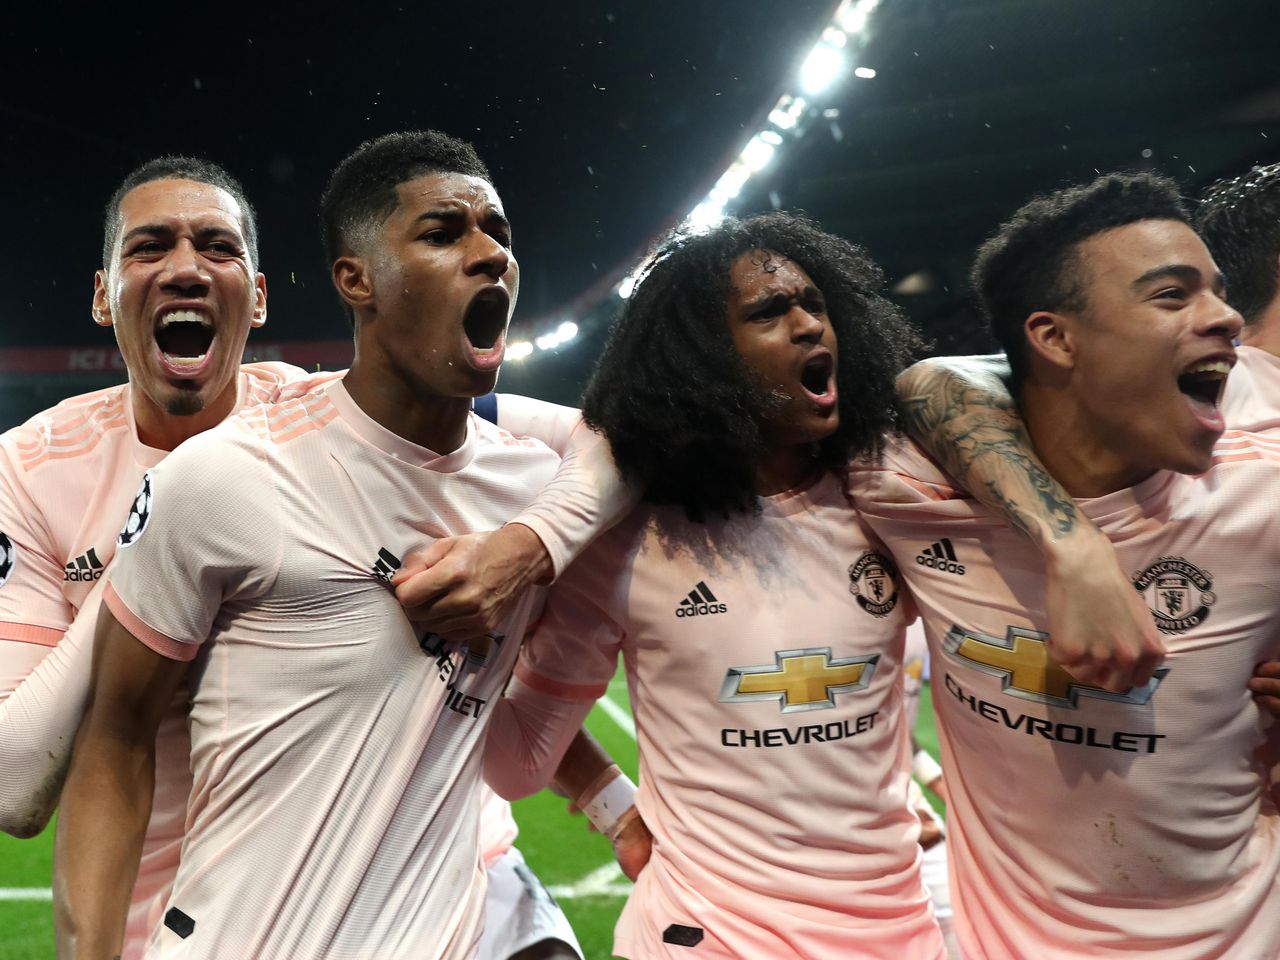 Psg 1 Manchester United 3 Champions League Match Report Manchester United